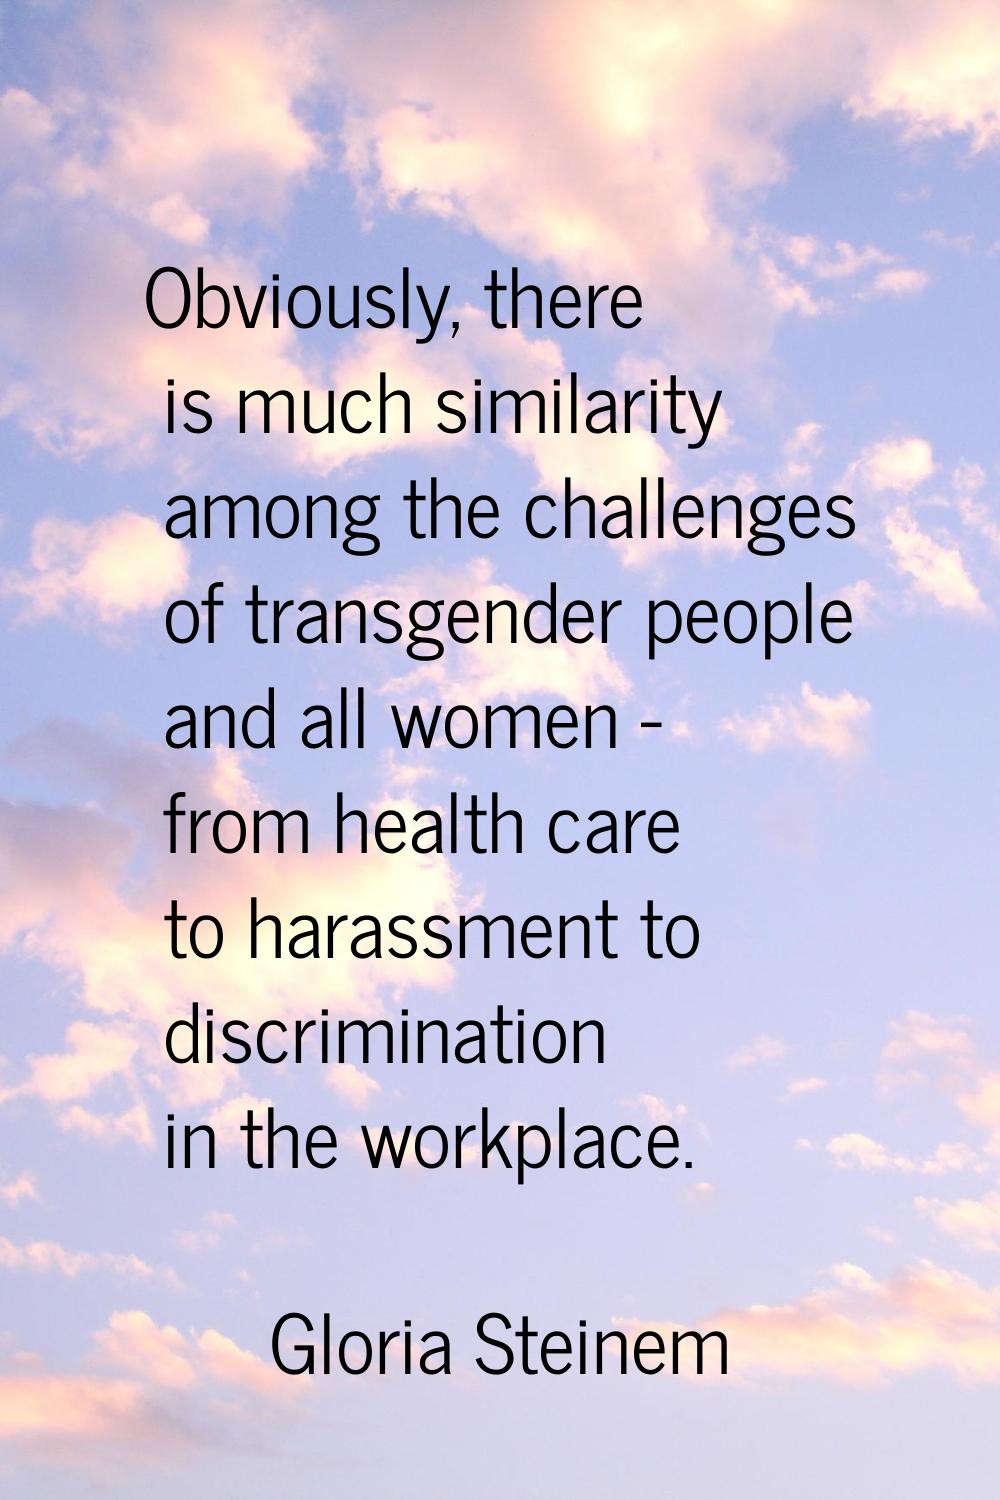 Obviously, there is much similarity among the challenges of transgender people and all women - from